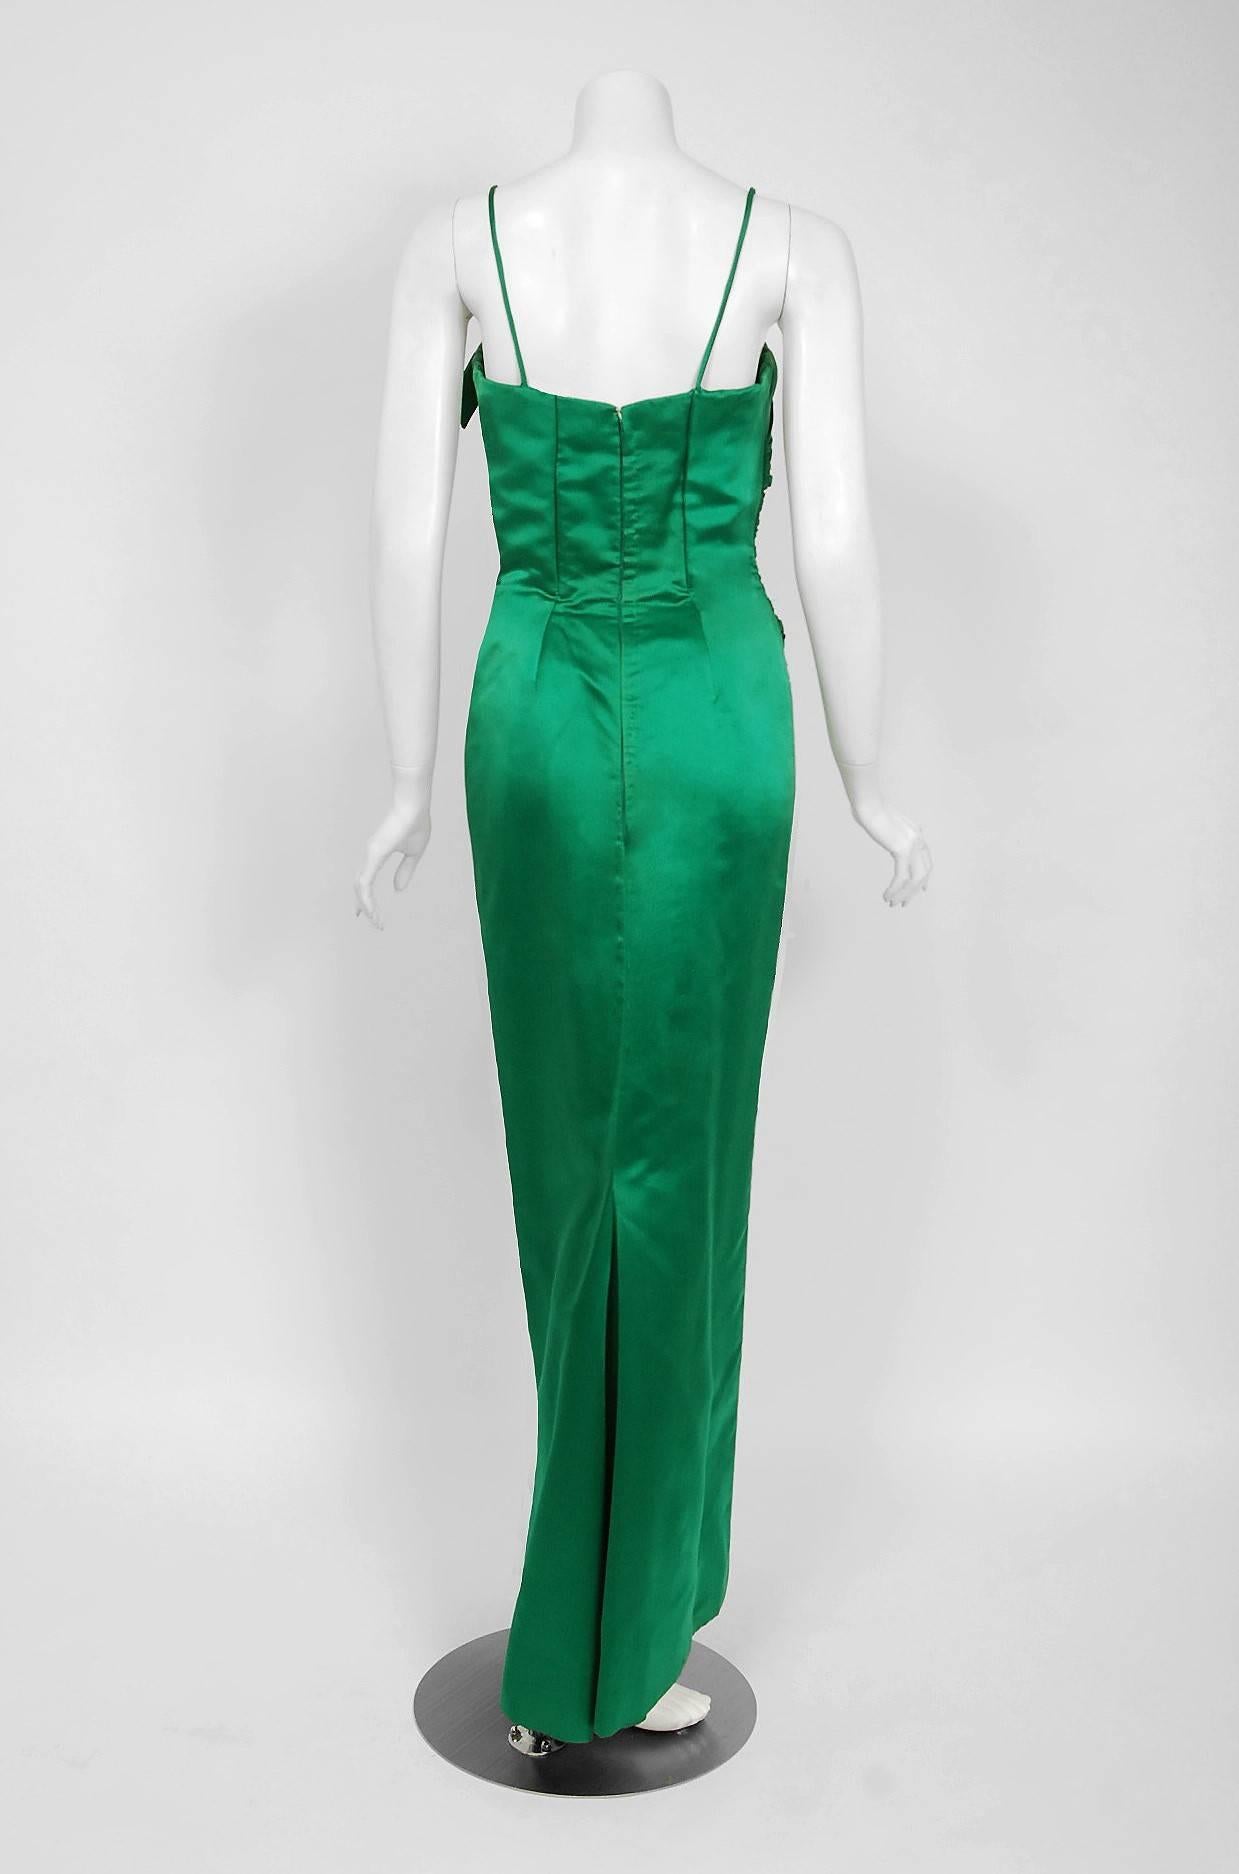 the green satin gown answer key